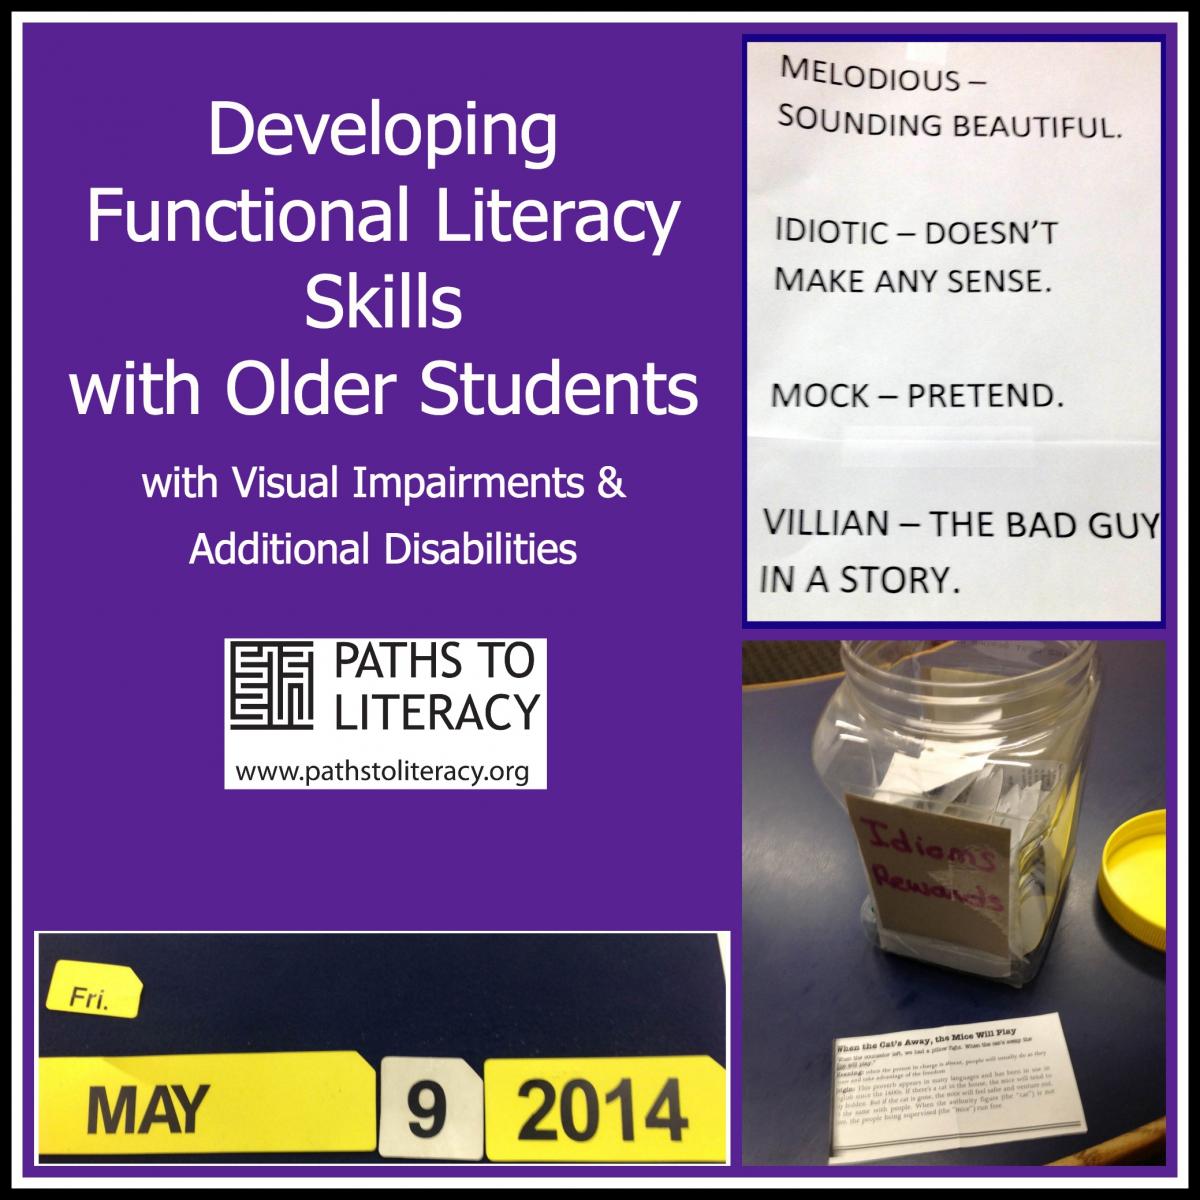 Developing Functional Literacy Skills with Older Students